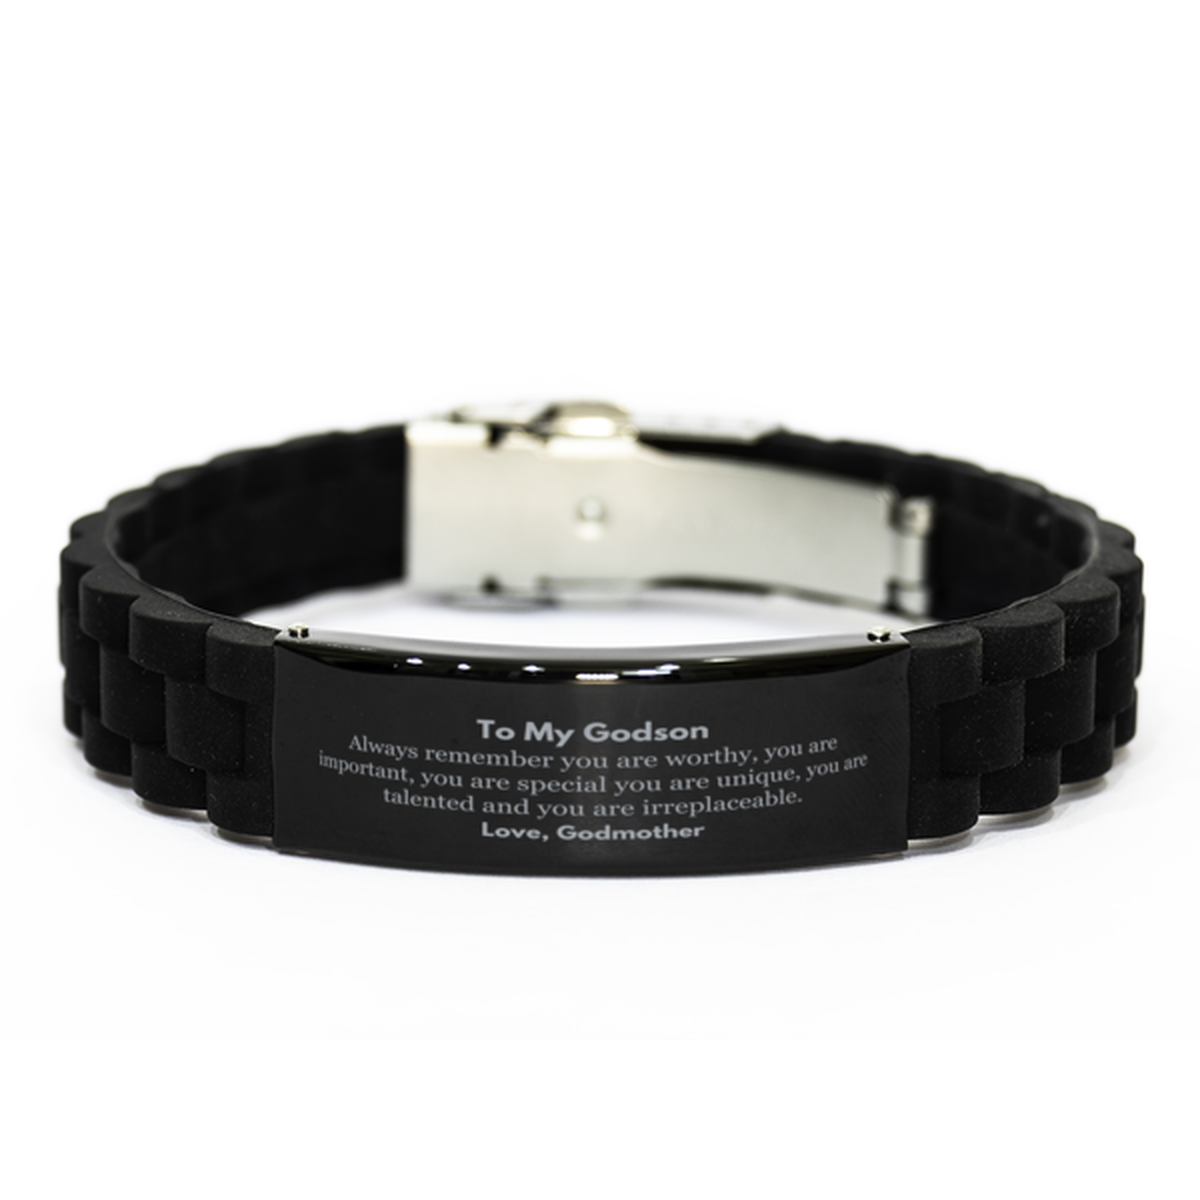 Godson Birthday Gifts from Godmother, Inspirational Black Glidelock Clasp Bracelet for Godson Christmas Graduation Gifts for Godson Always remember you are worthy, you are important. Love, Godmother